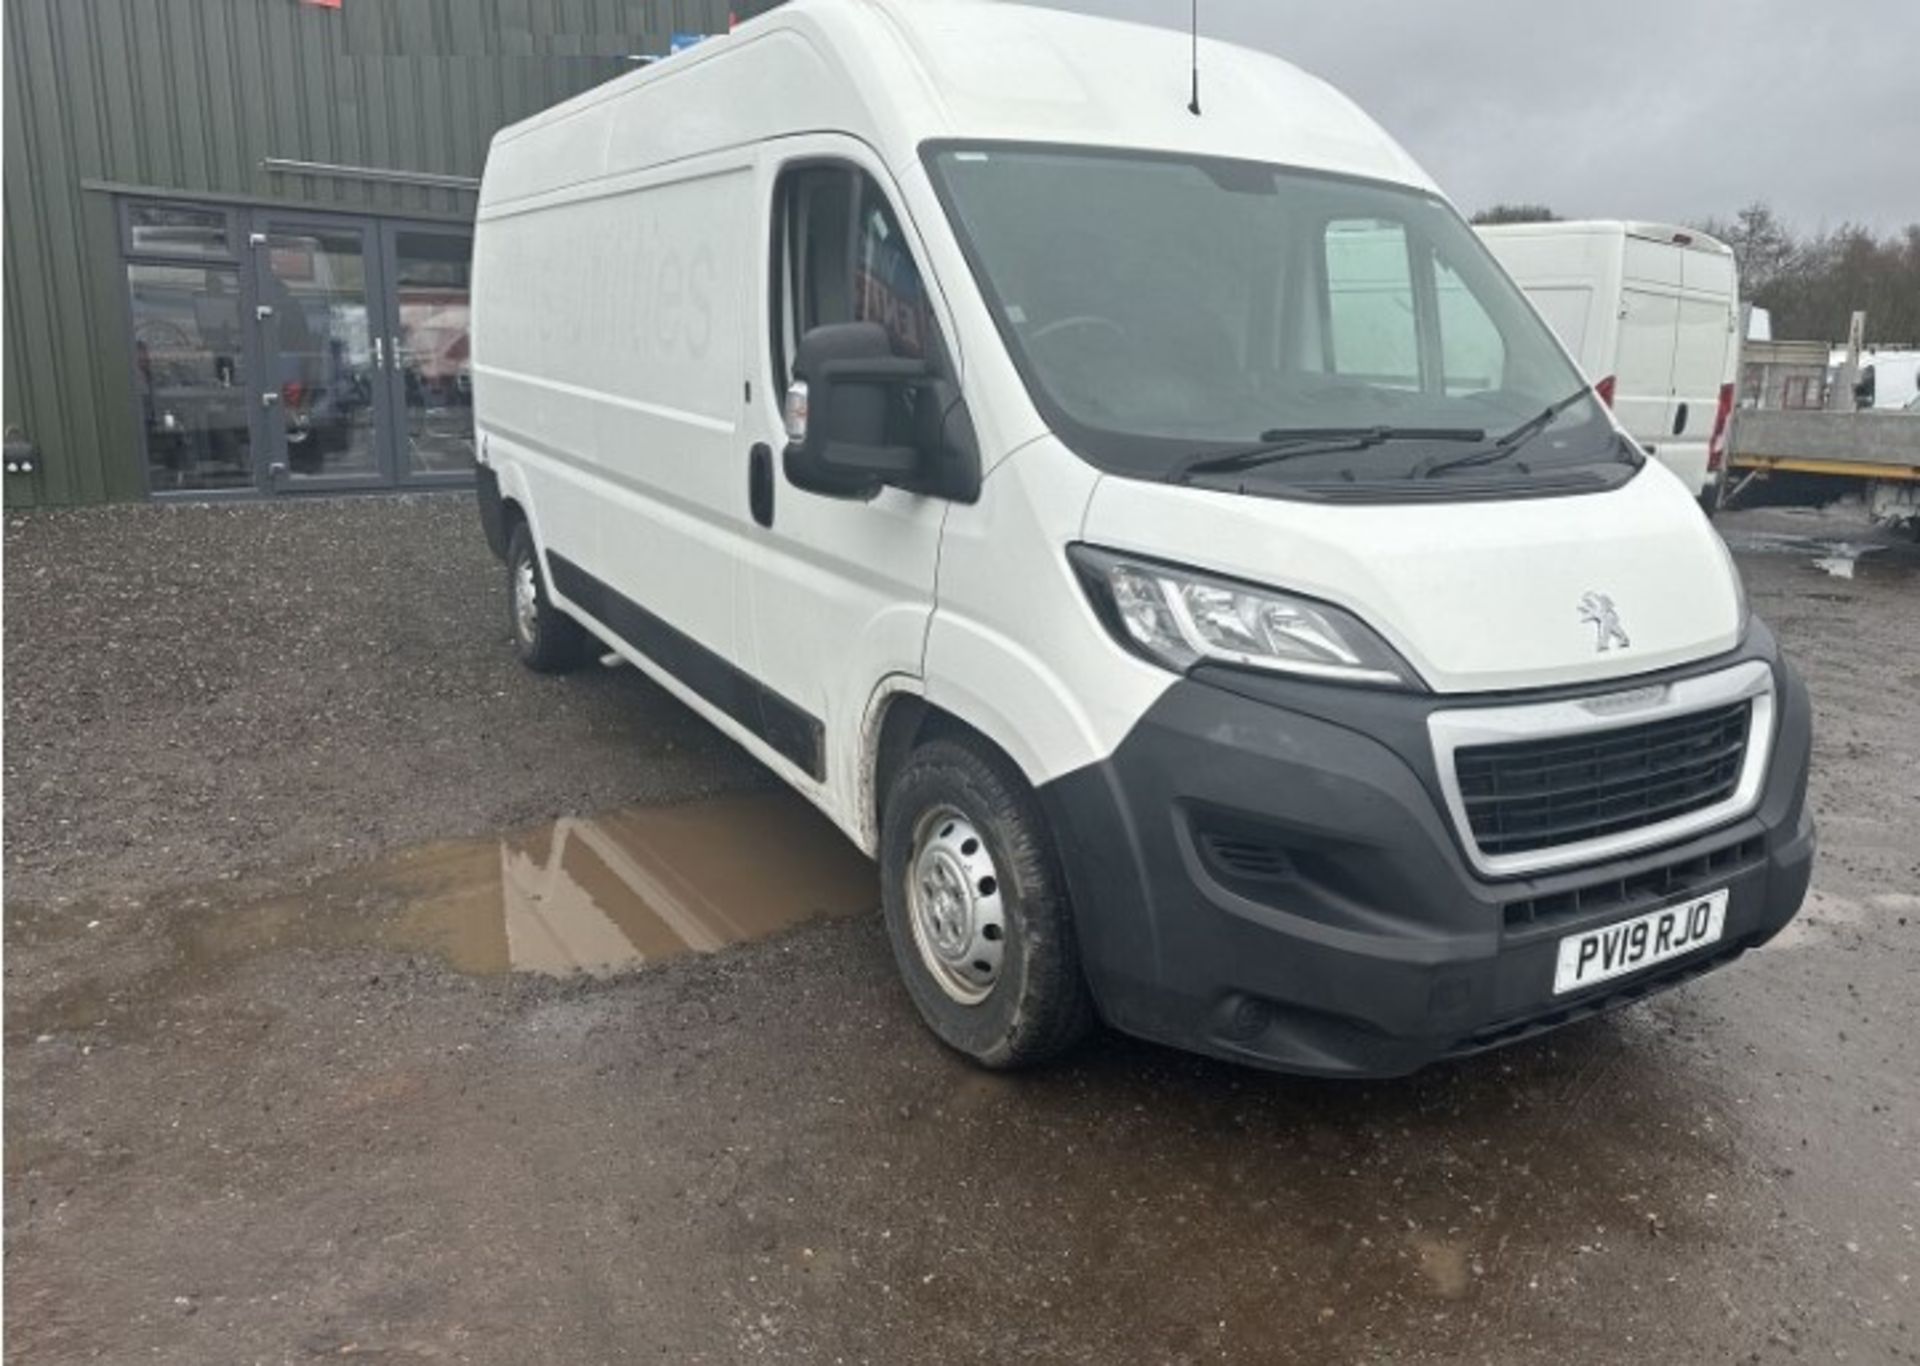 WHITE WORKHORSE: 2019 PANEL VAN, READY FOR DUTY